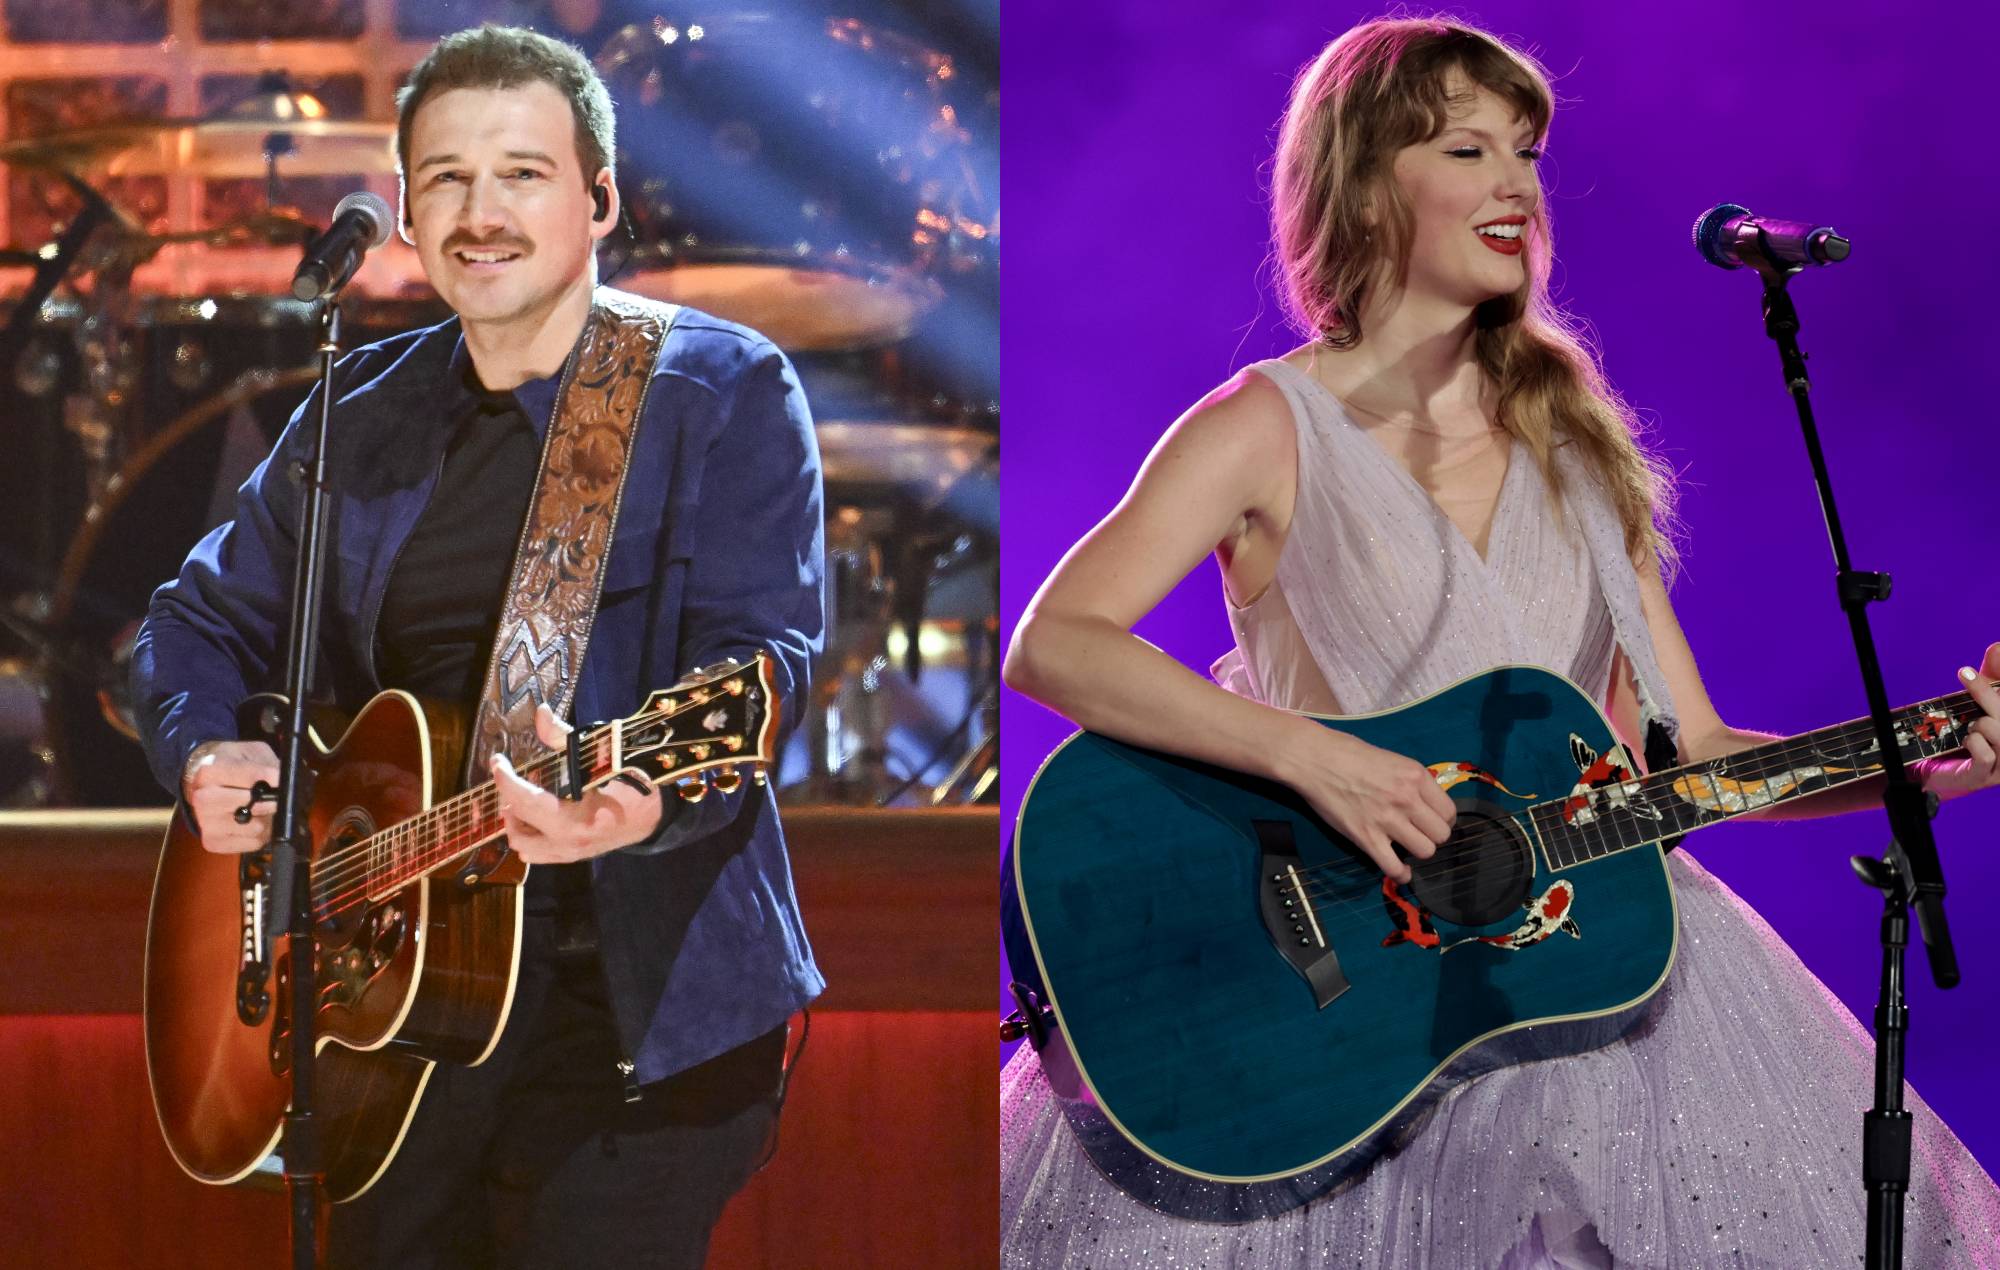 Morgan Wallen responds to fans booing Taylor Swift mention at Indianapolis show